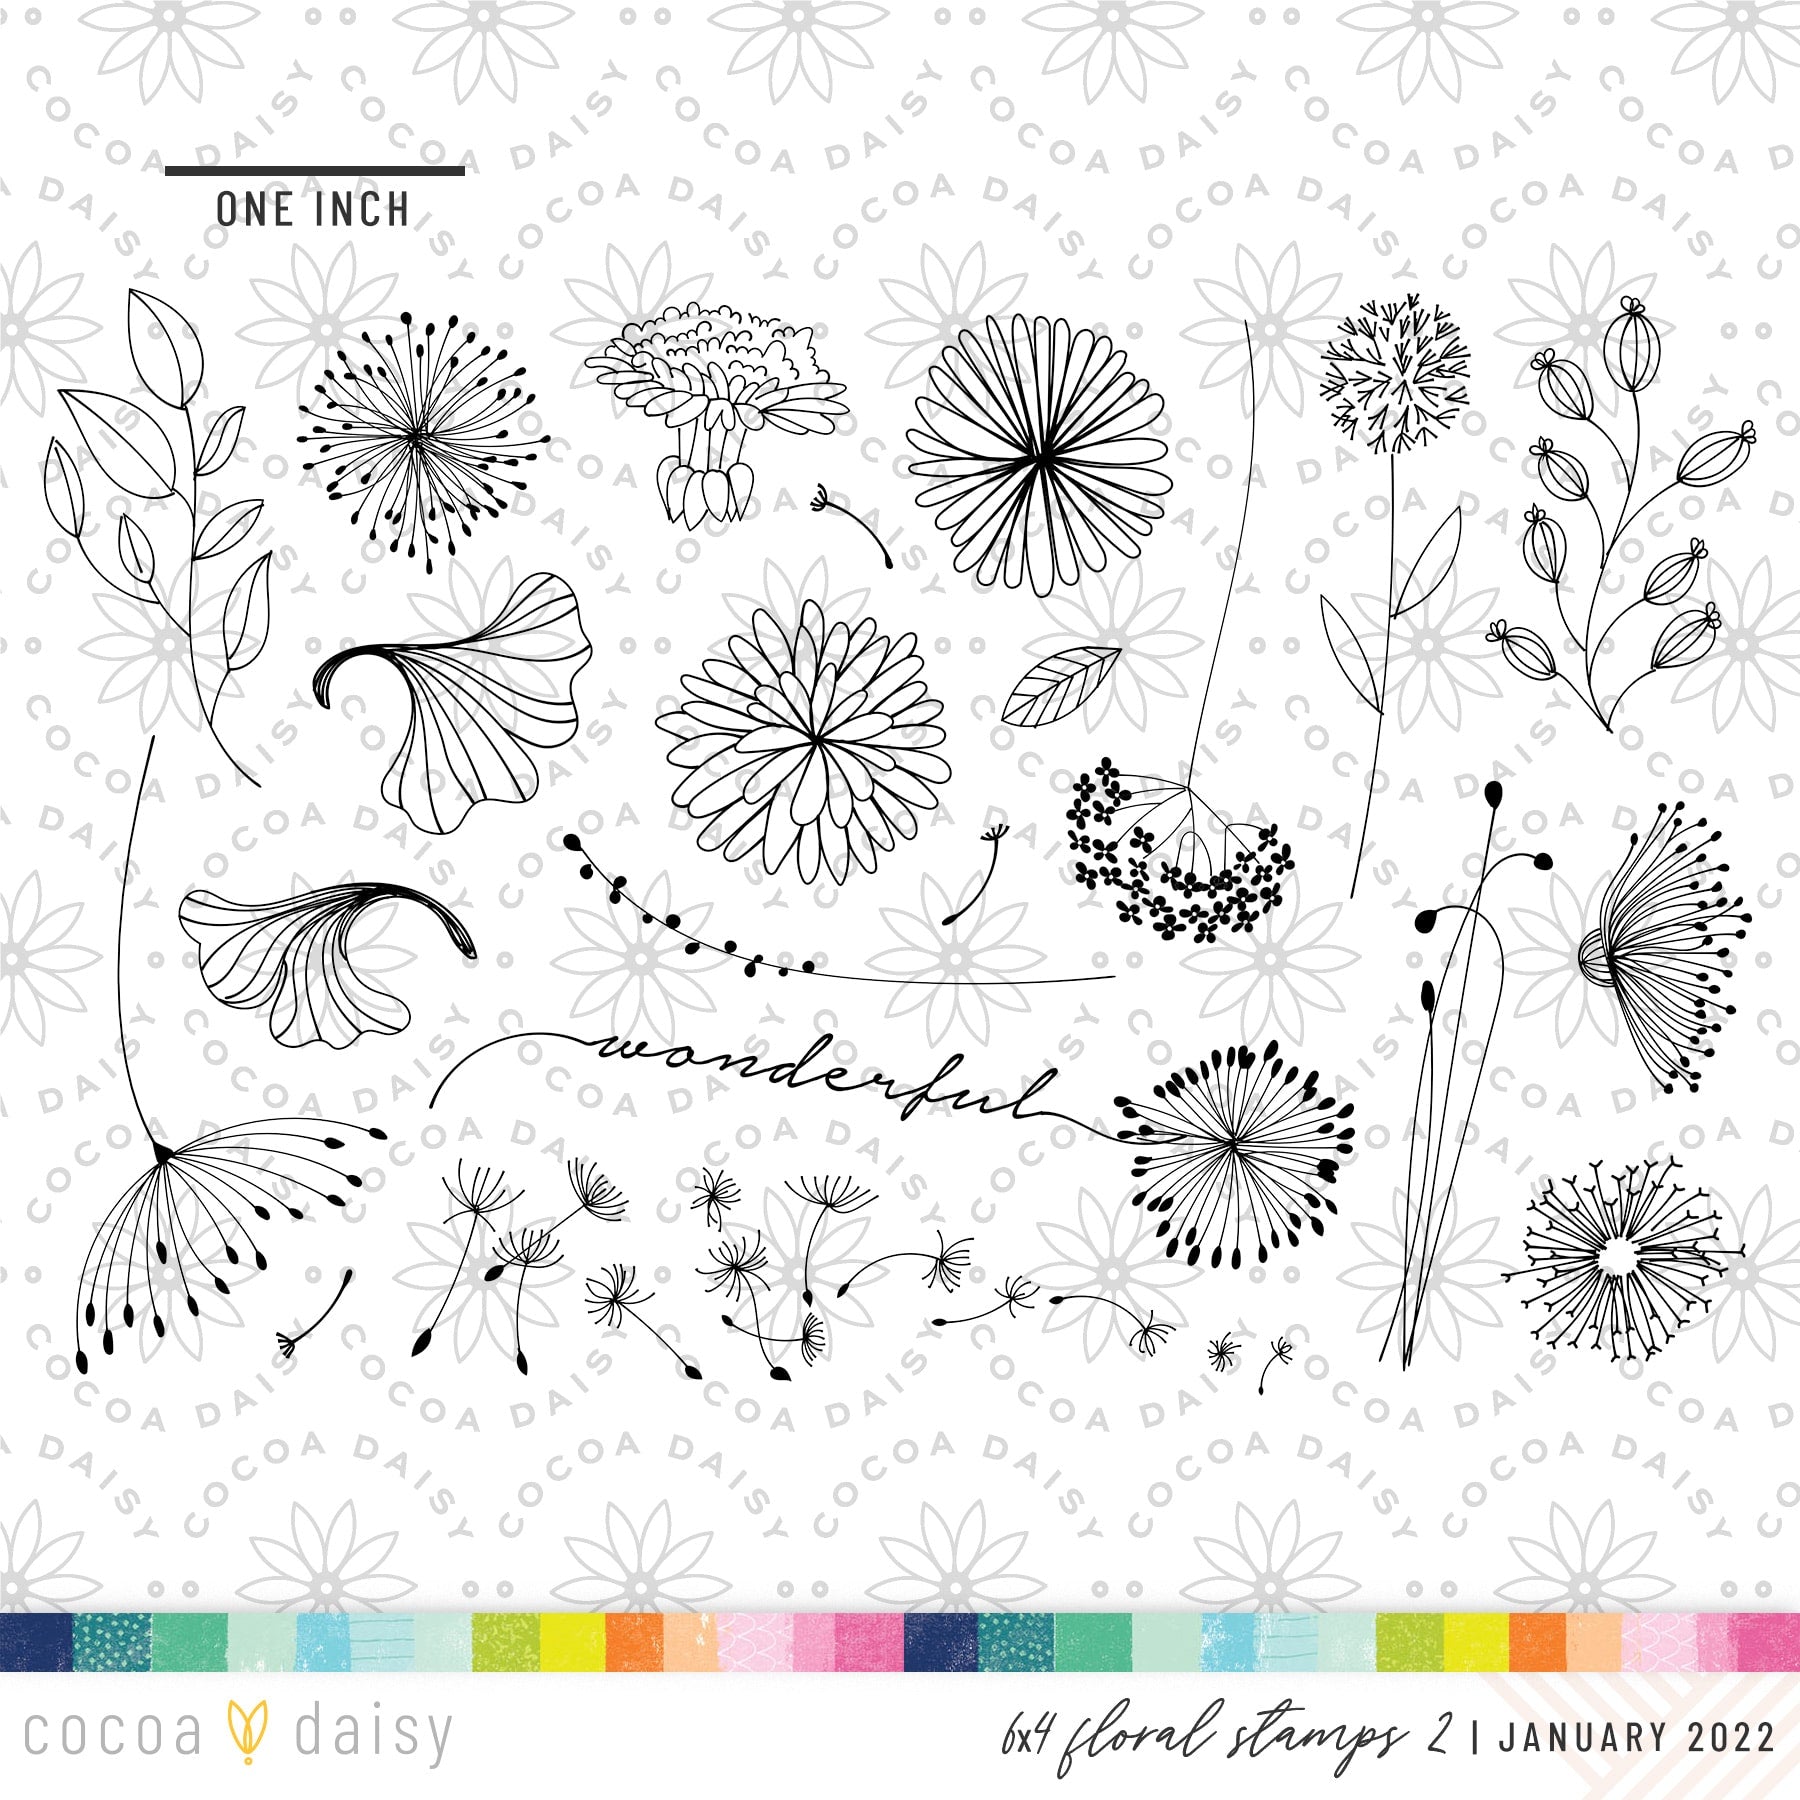 Confetti Wishes 4x6 "Dandelion Wishes" Stamp Set January 2022